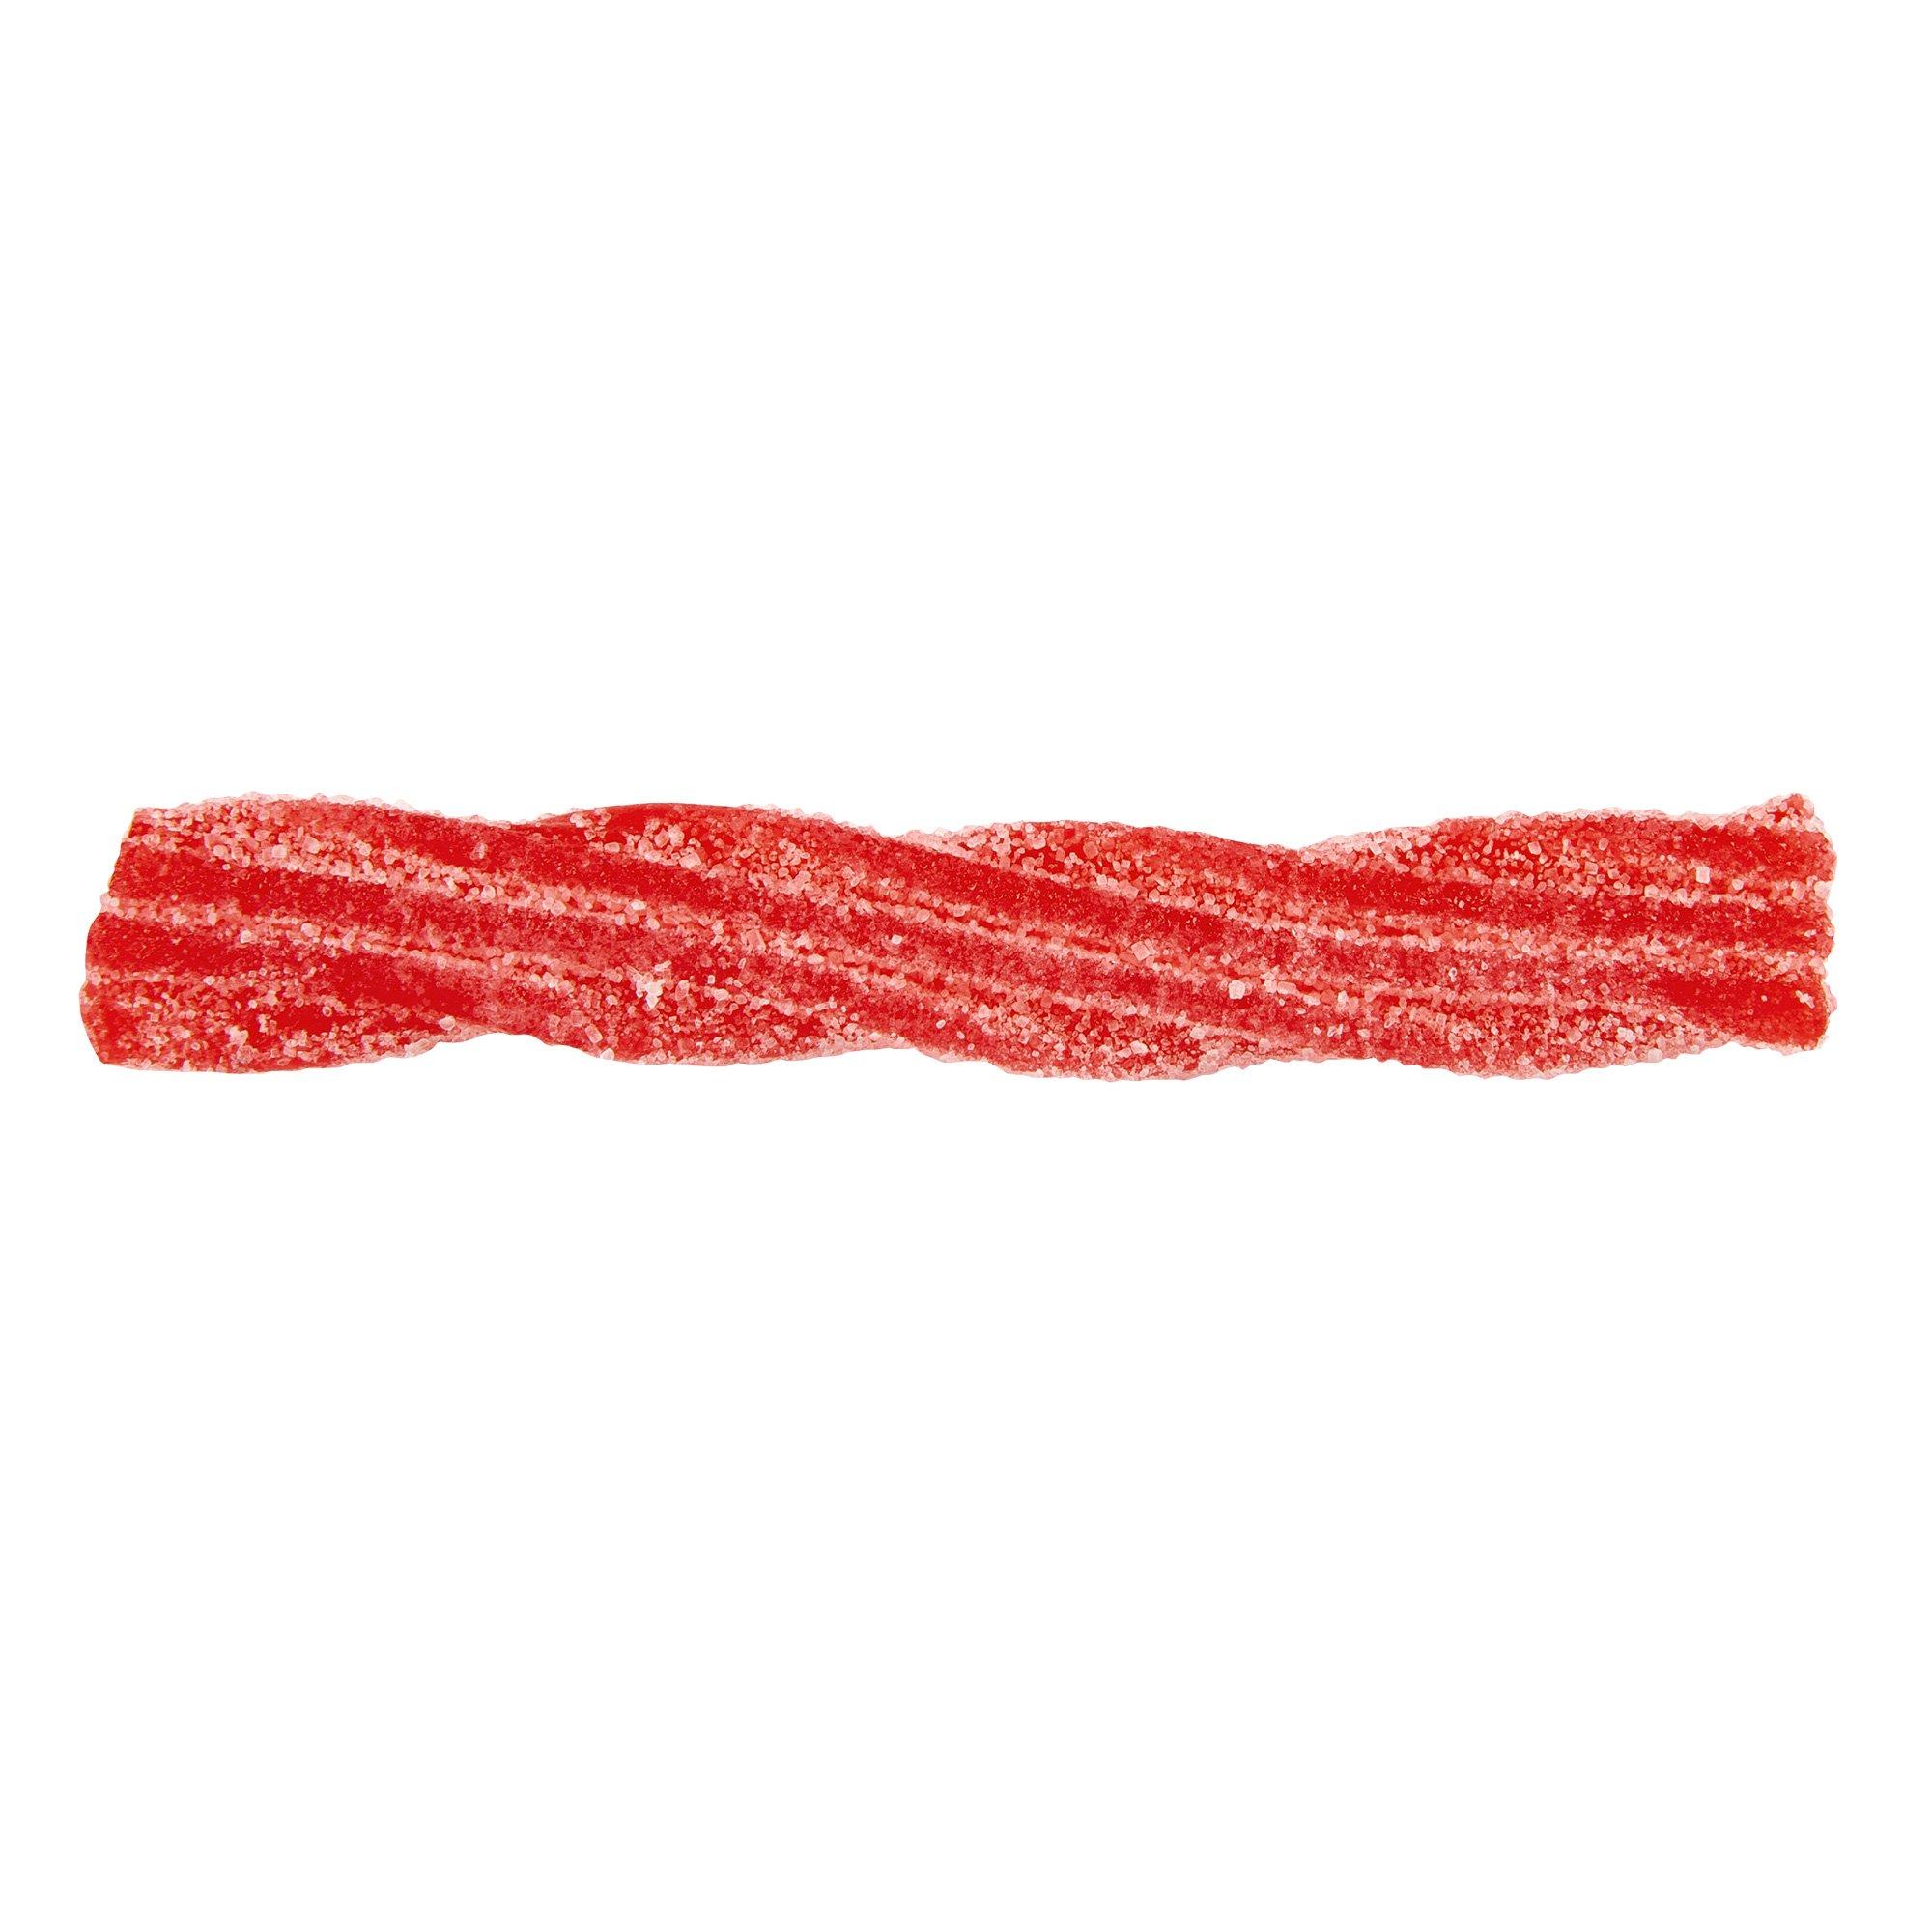 Red Sour Punch Twists, 16oz - Cherry Flavor